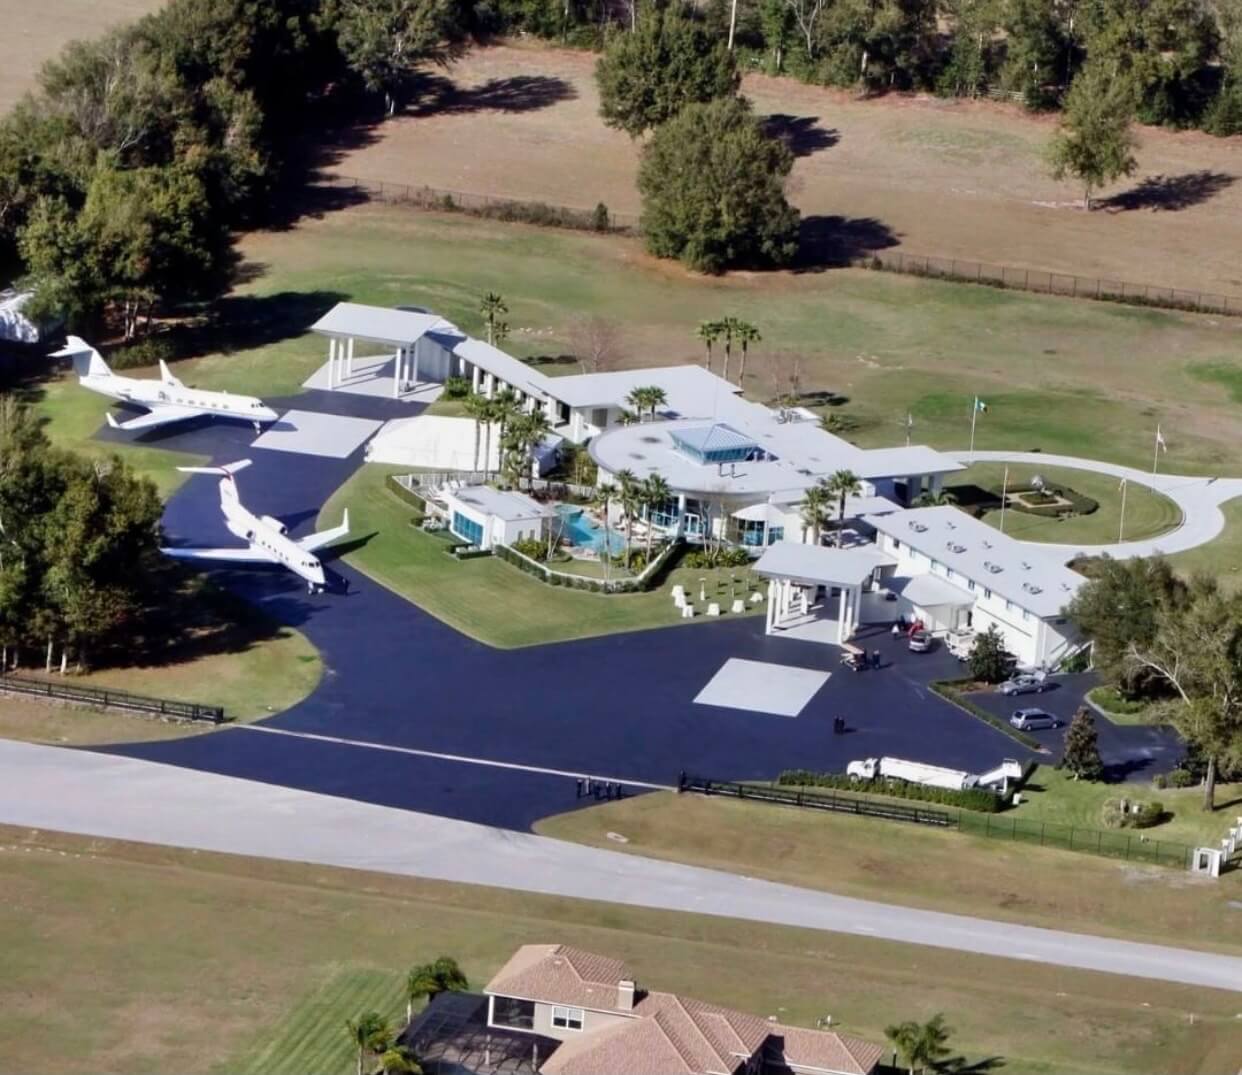 John Travolta's one of a kind "airport house"